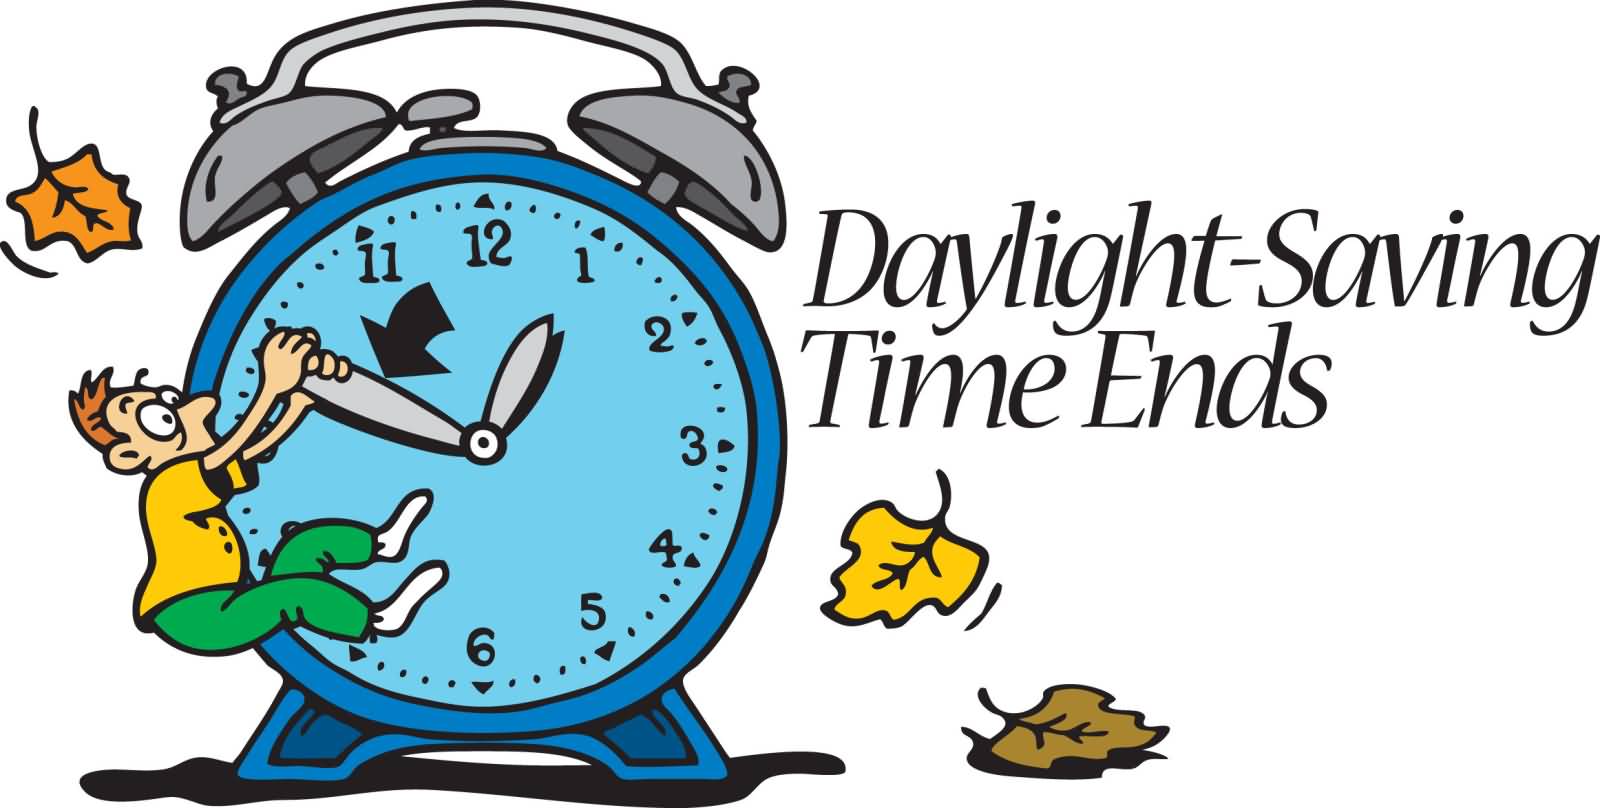 50+ Amazing Daylight Saving Time Ends Wish Pictures